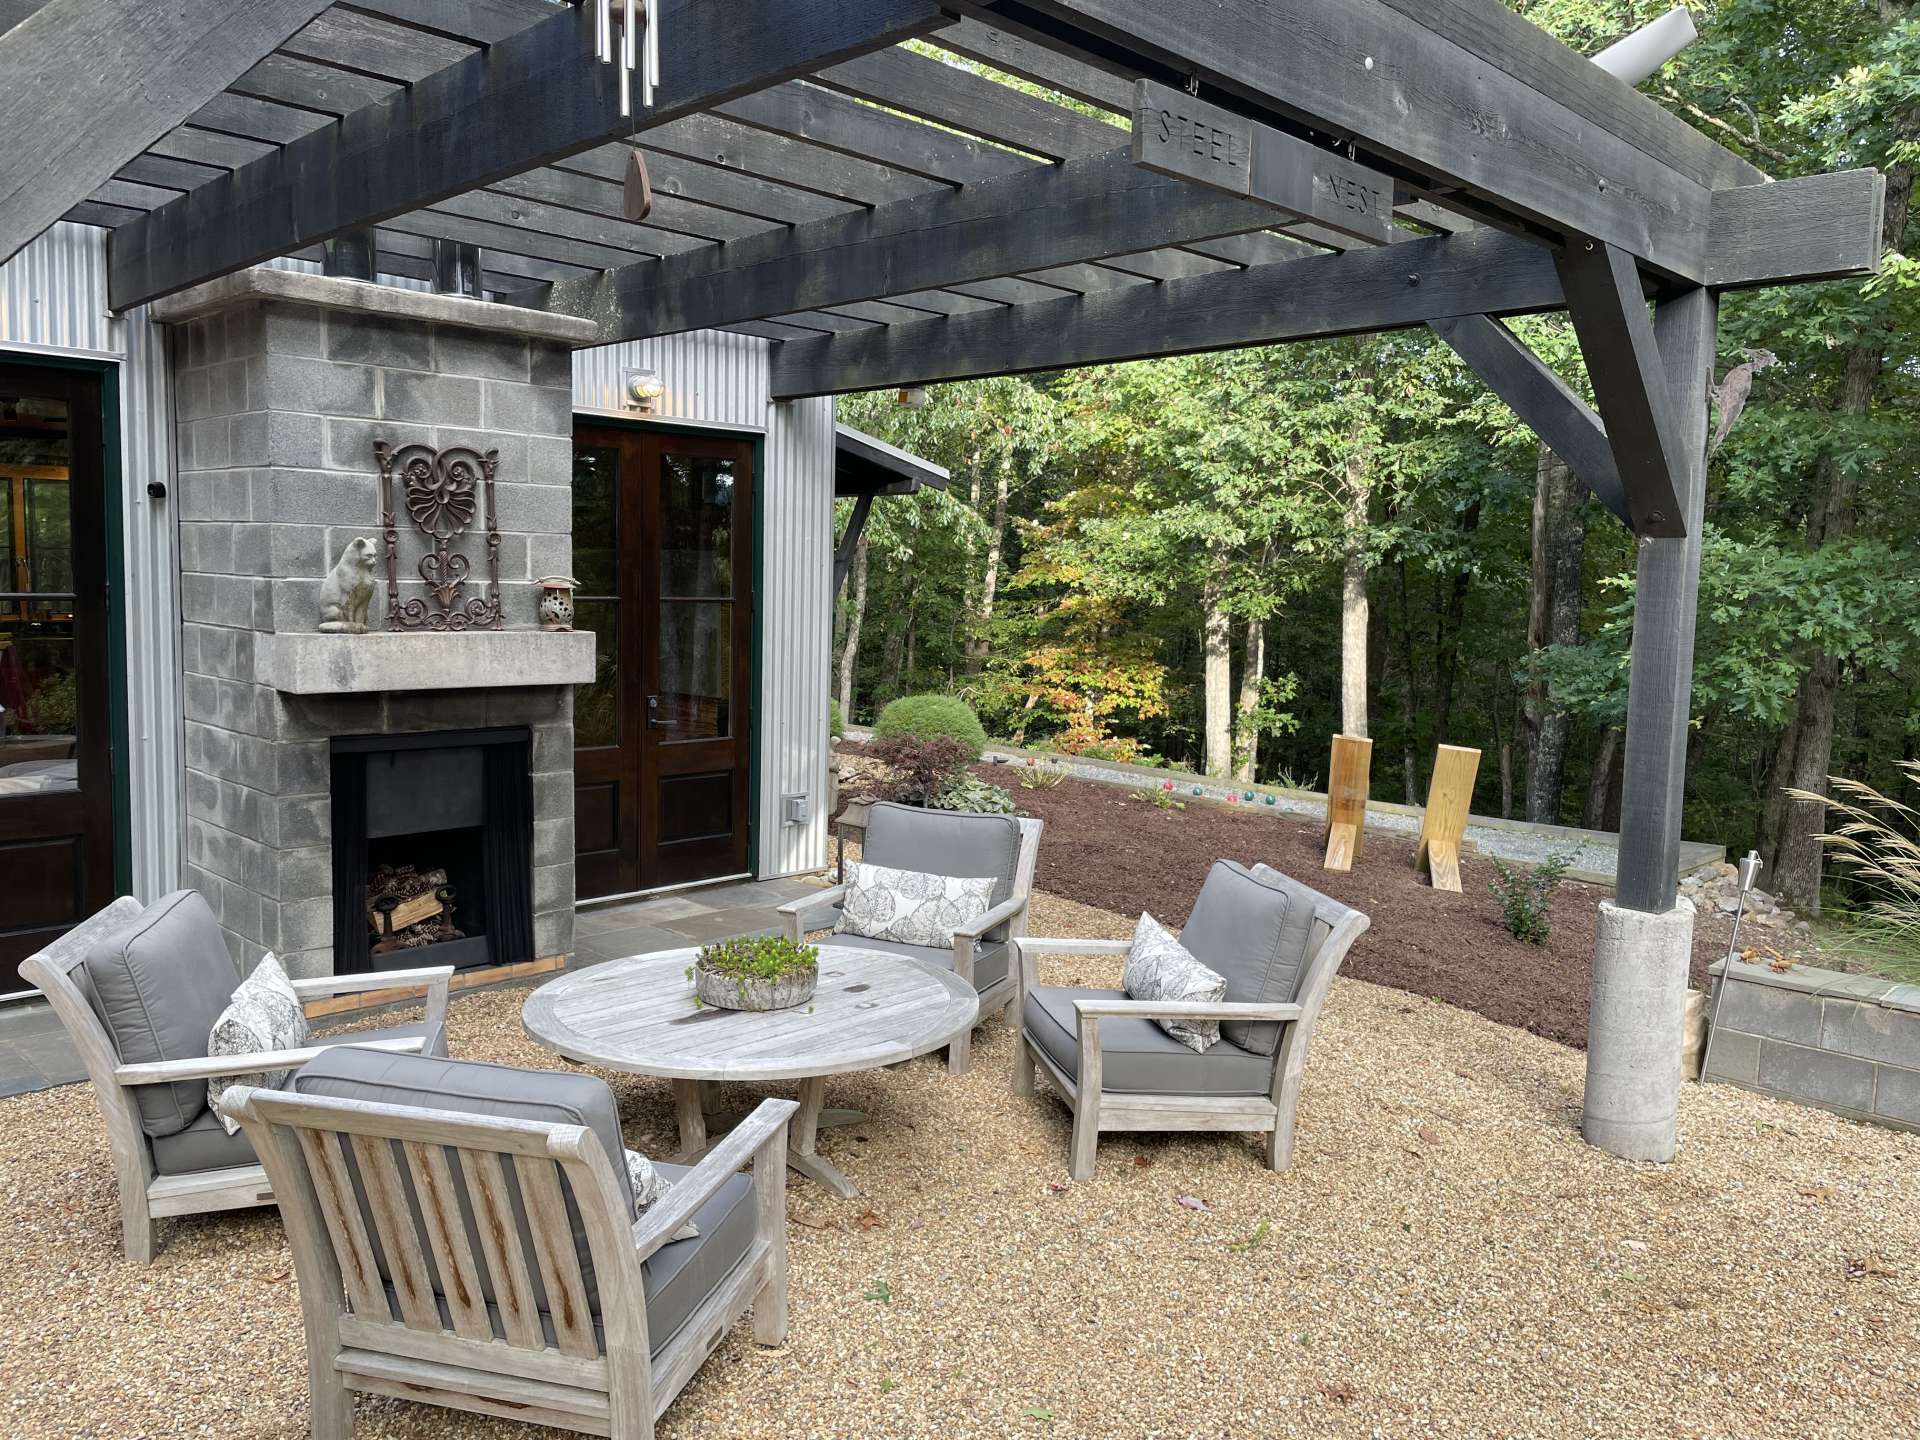 Outdoor seating area with fireplace.